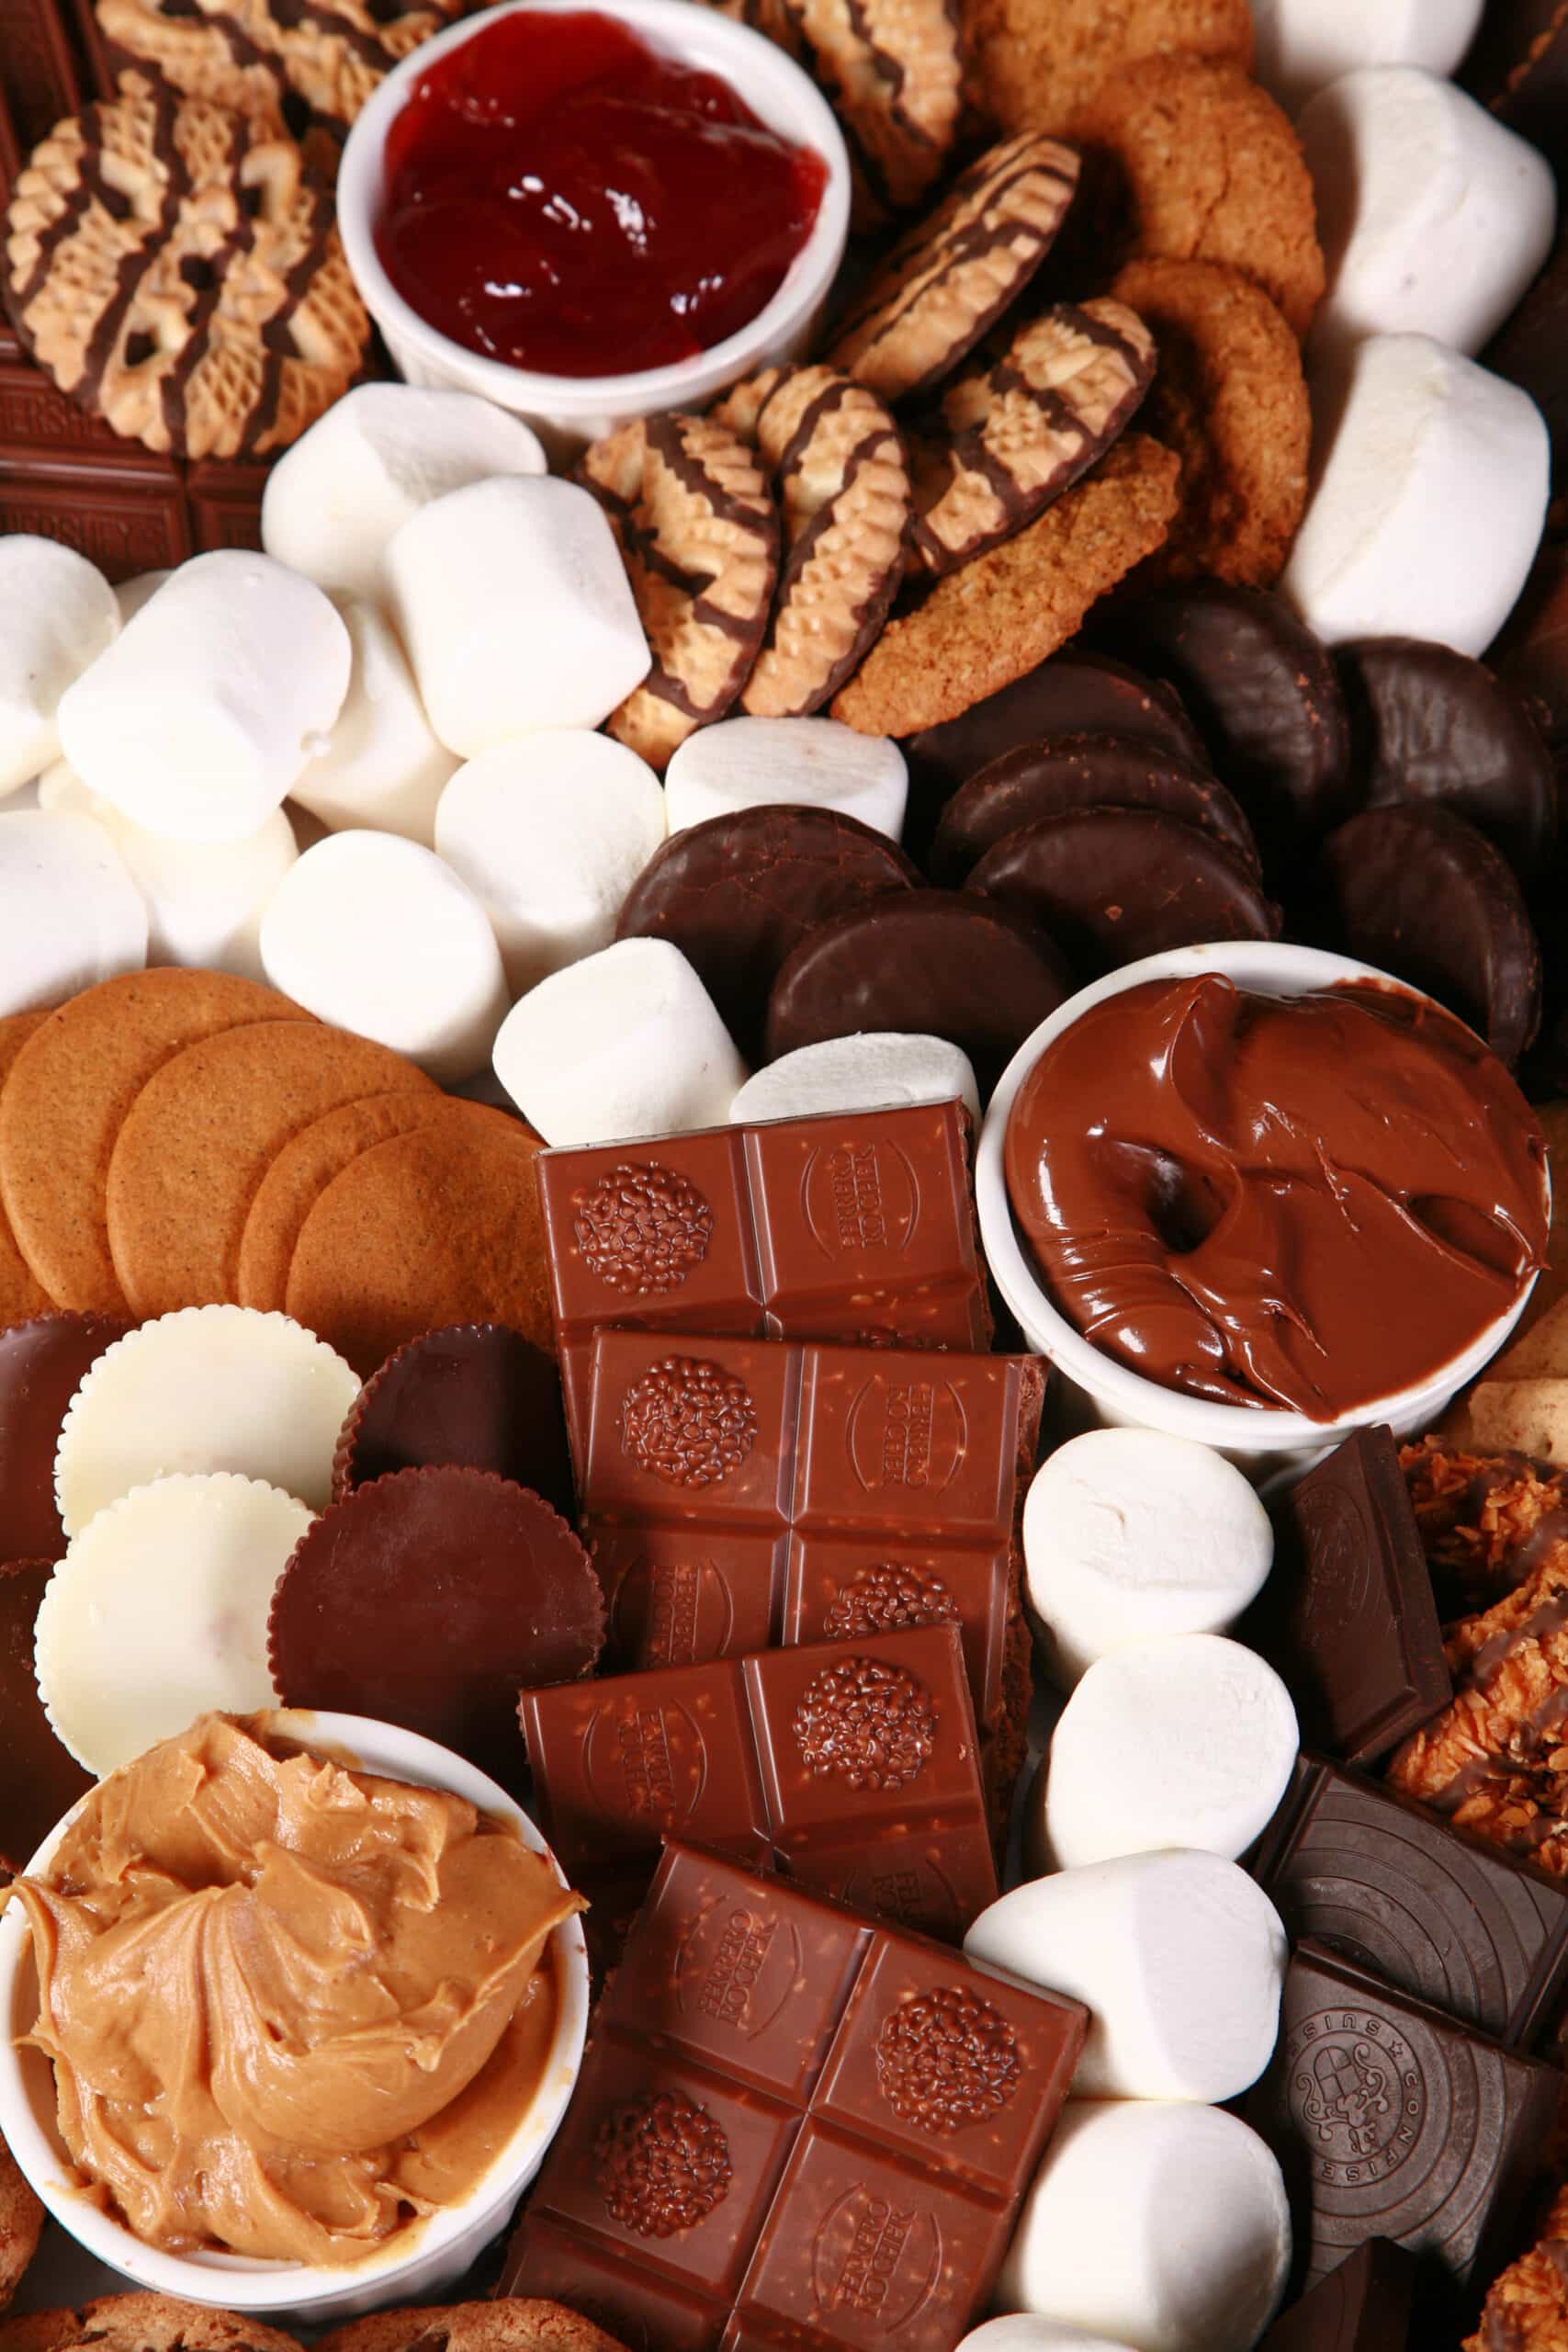 A s’mores tray, with ramekins of sauces, different kinds of cookies, chocolate, and marshmallows.